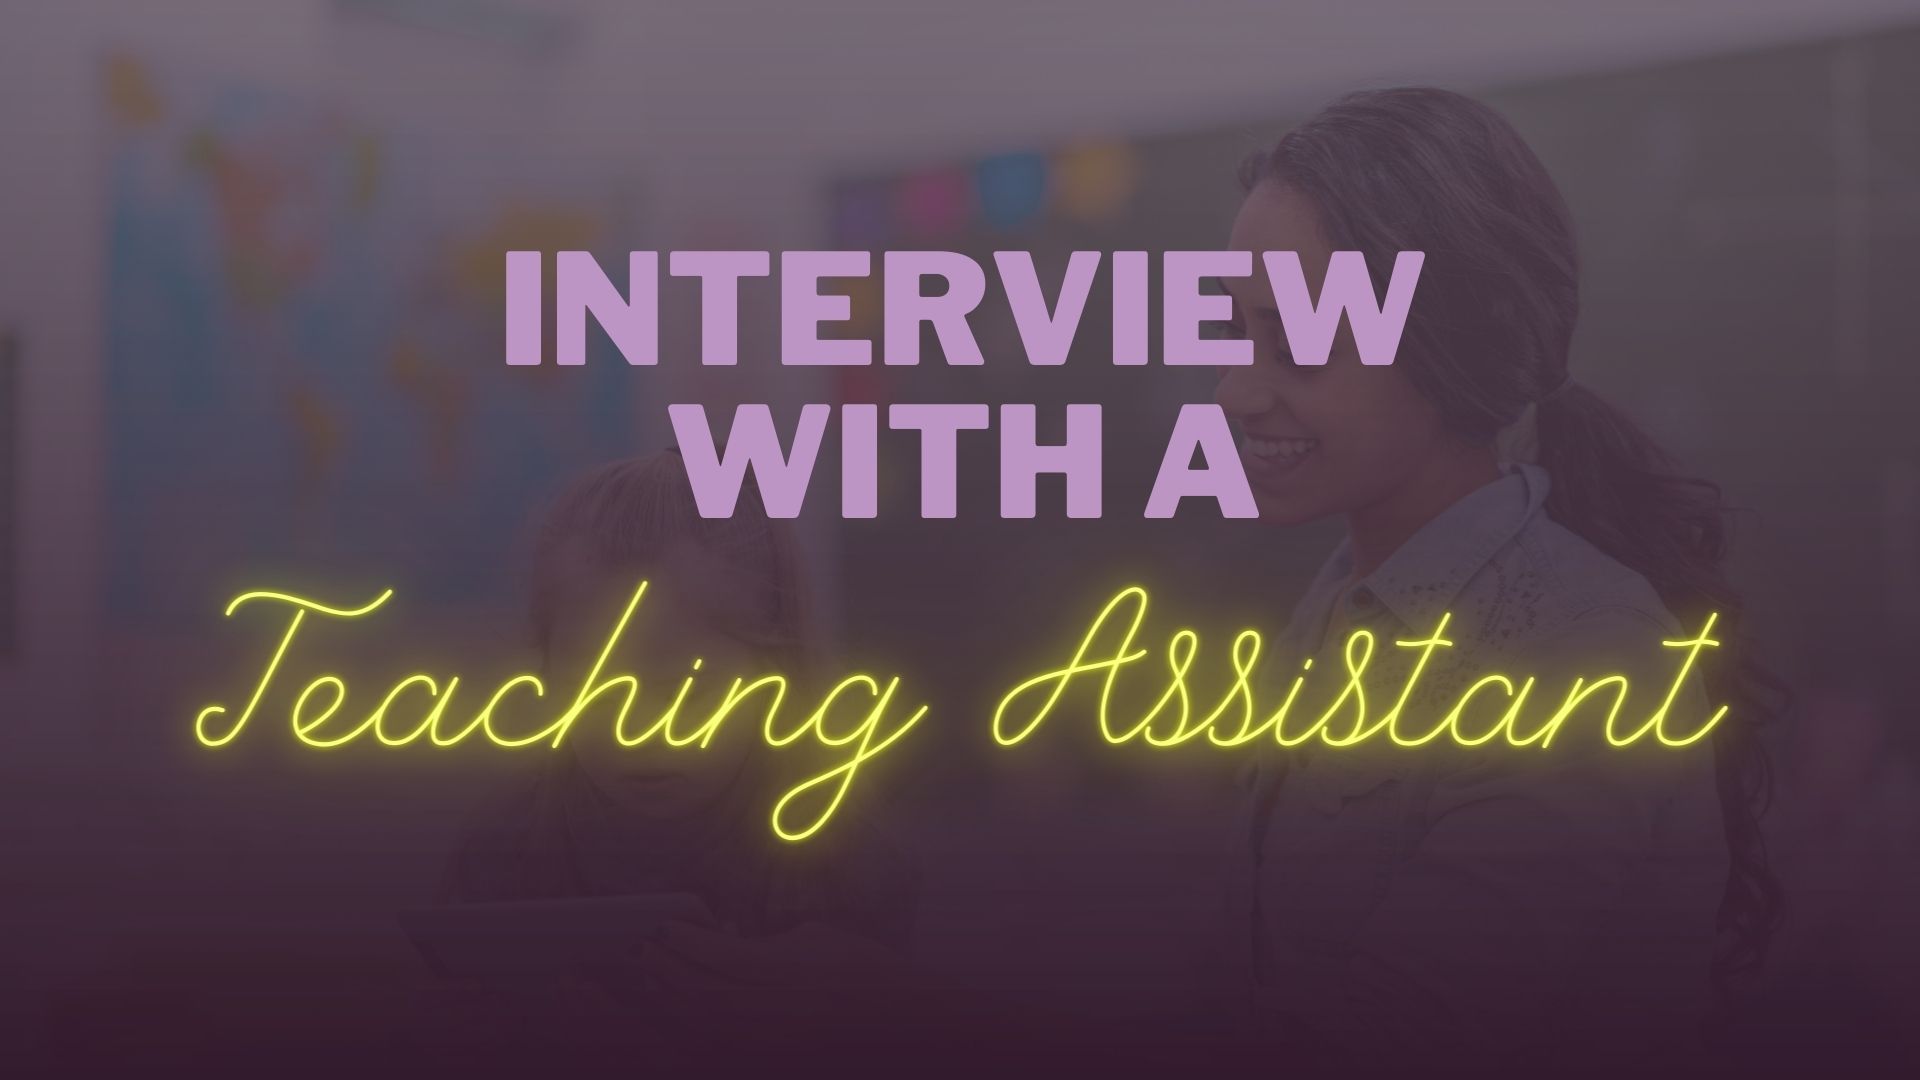 Interview with a Teaching Assistant